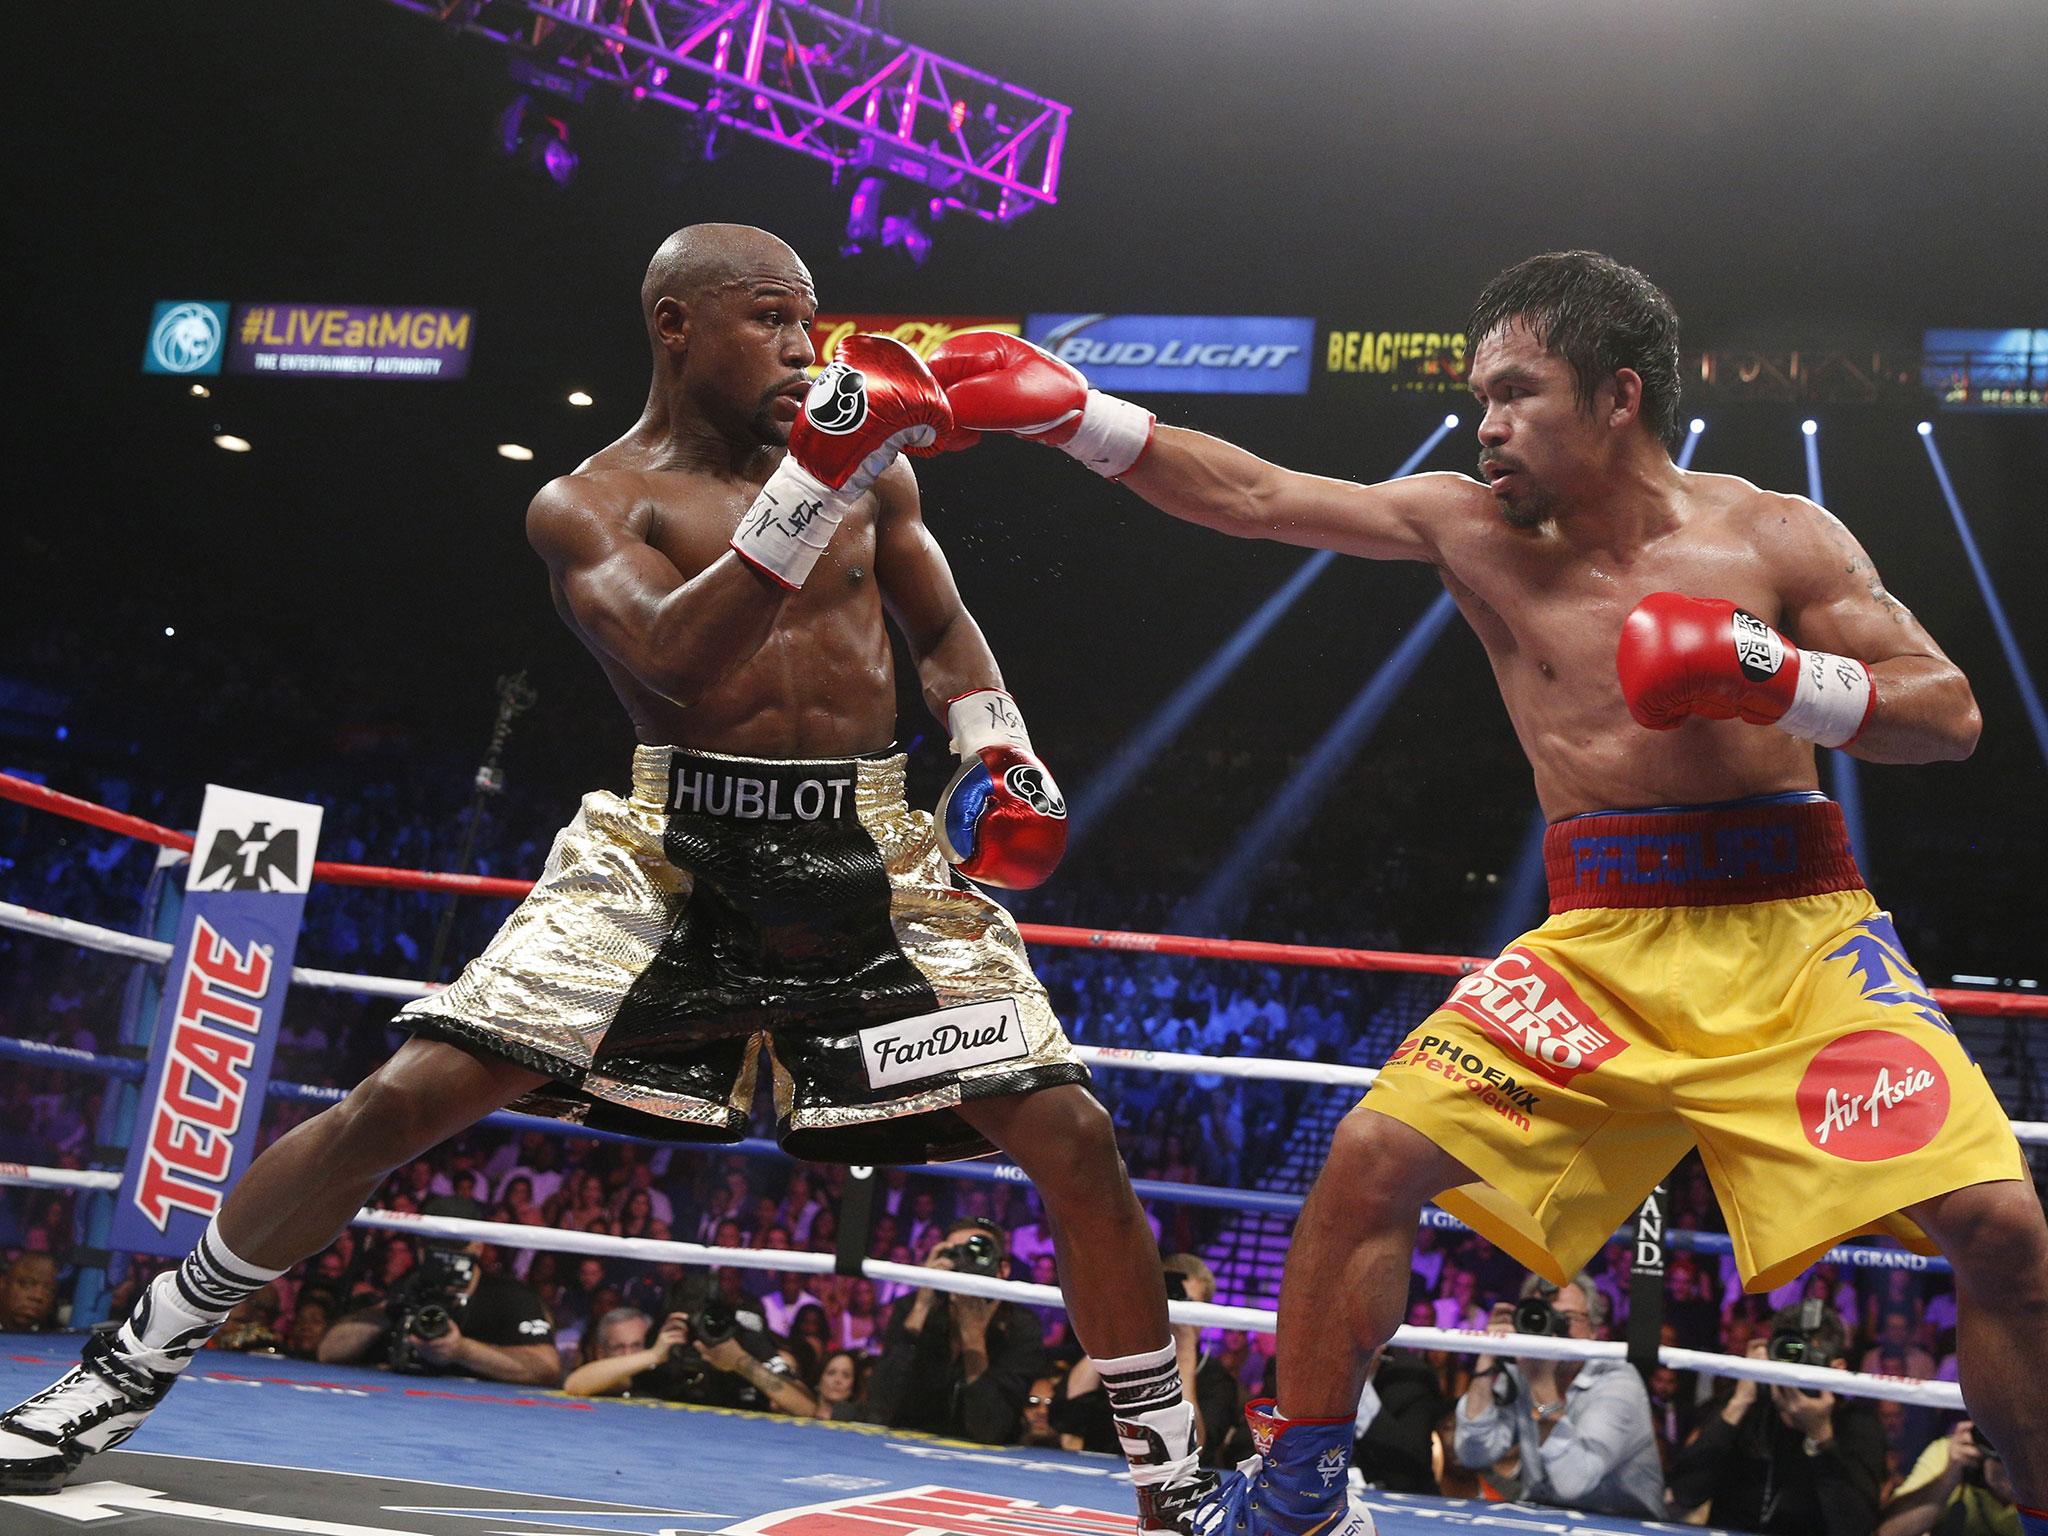 The two welterweights went head-to-head last year in a fight that generated in excess of $400m